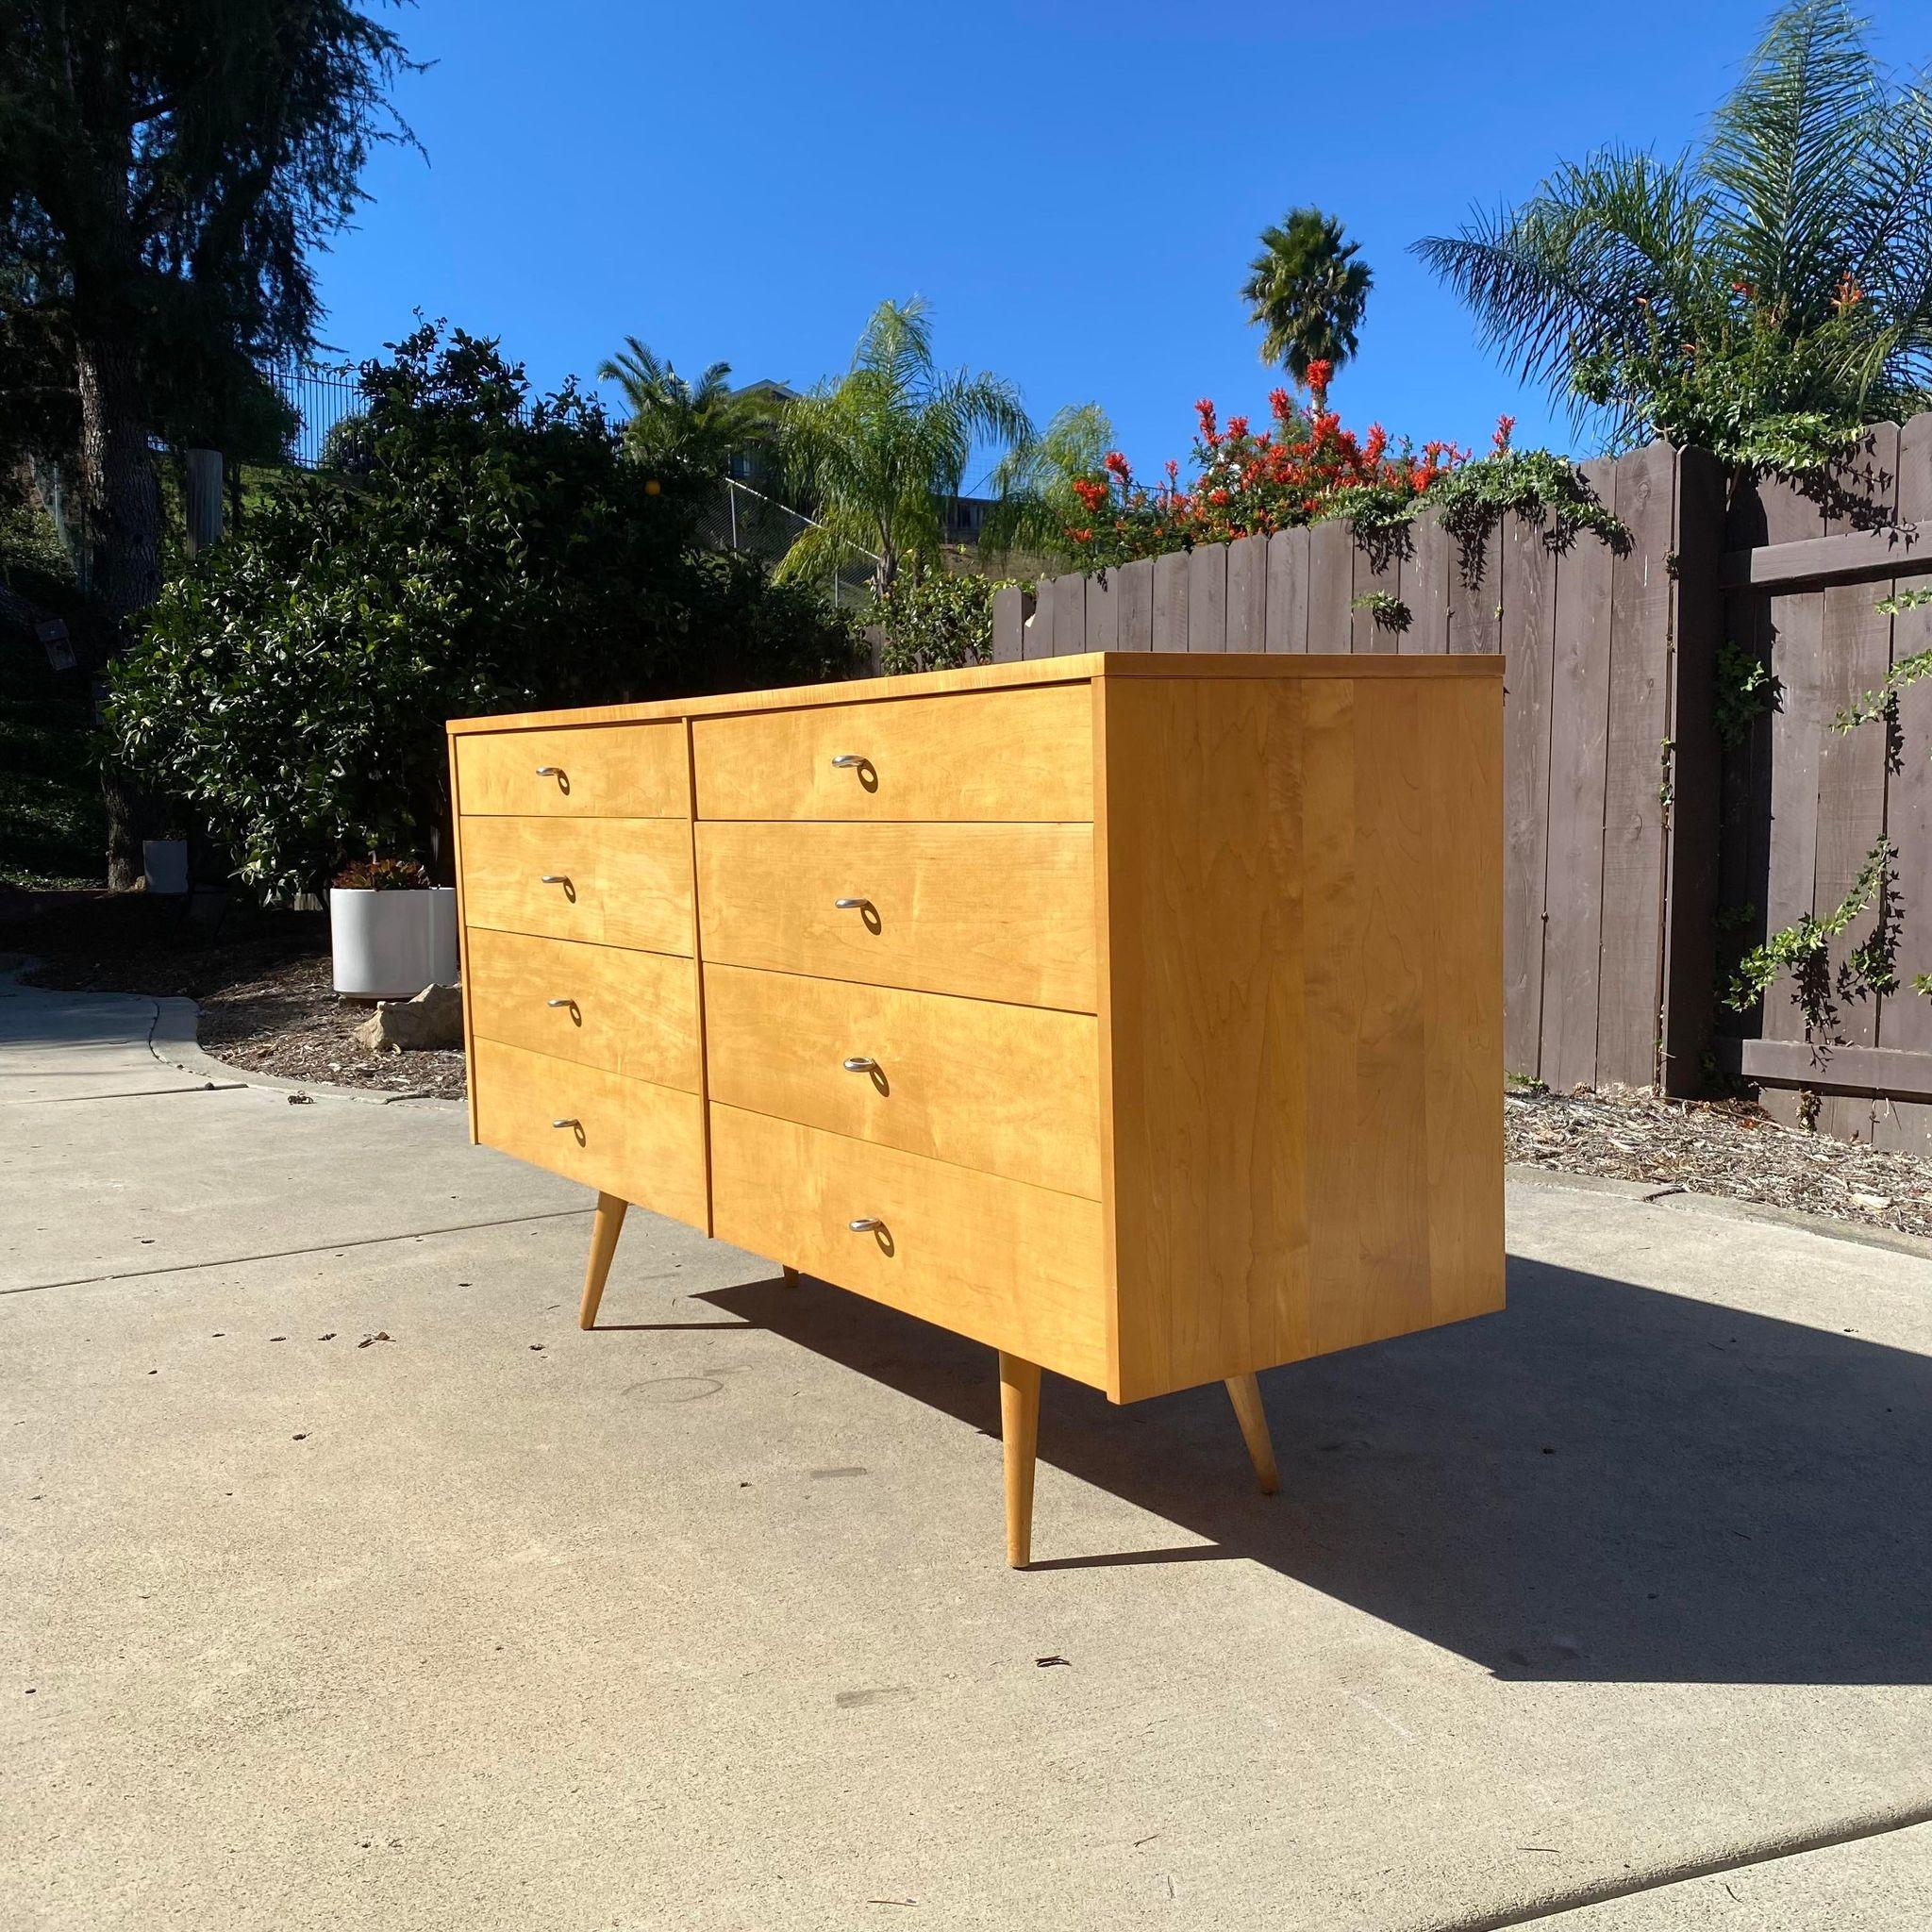 Now available is an amazing 8 drawer dresser designed by Paul McCobb for Planner Group, labeled. Features aluminum pulls, classic tapered legs for that sleek mid century look, and a solid maple finish. Although this piece has some wear, it is